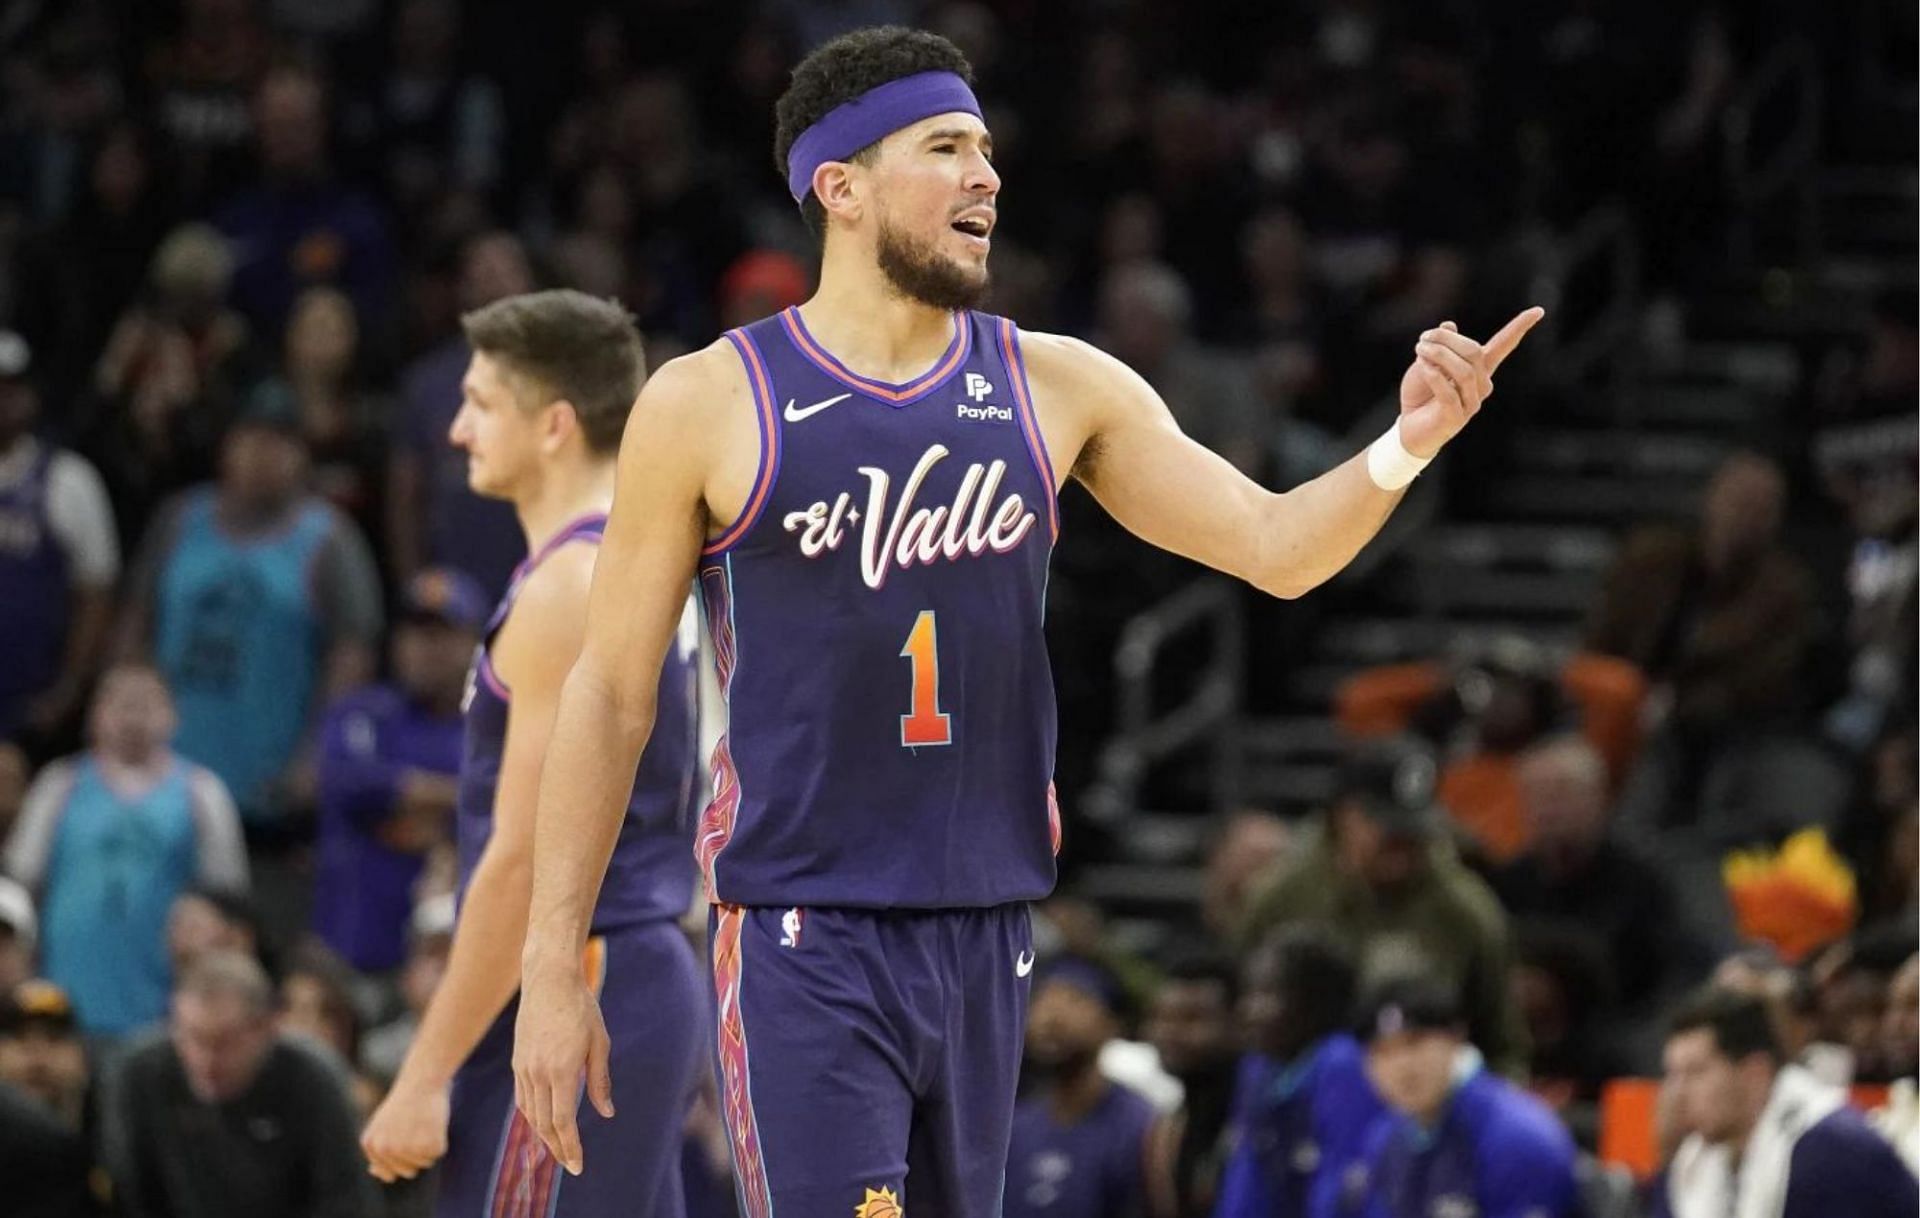 Devin Booker lauds team for the fourth quarter adjustments to avoid an upset from the Washington Wizards